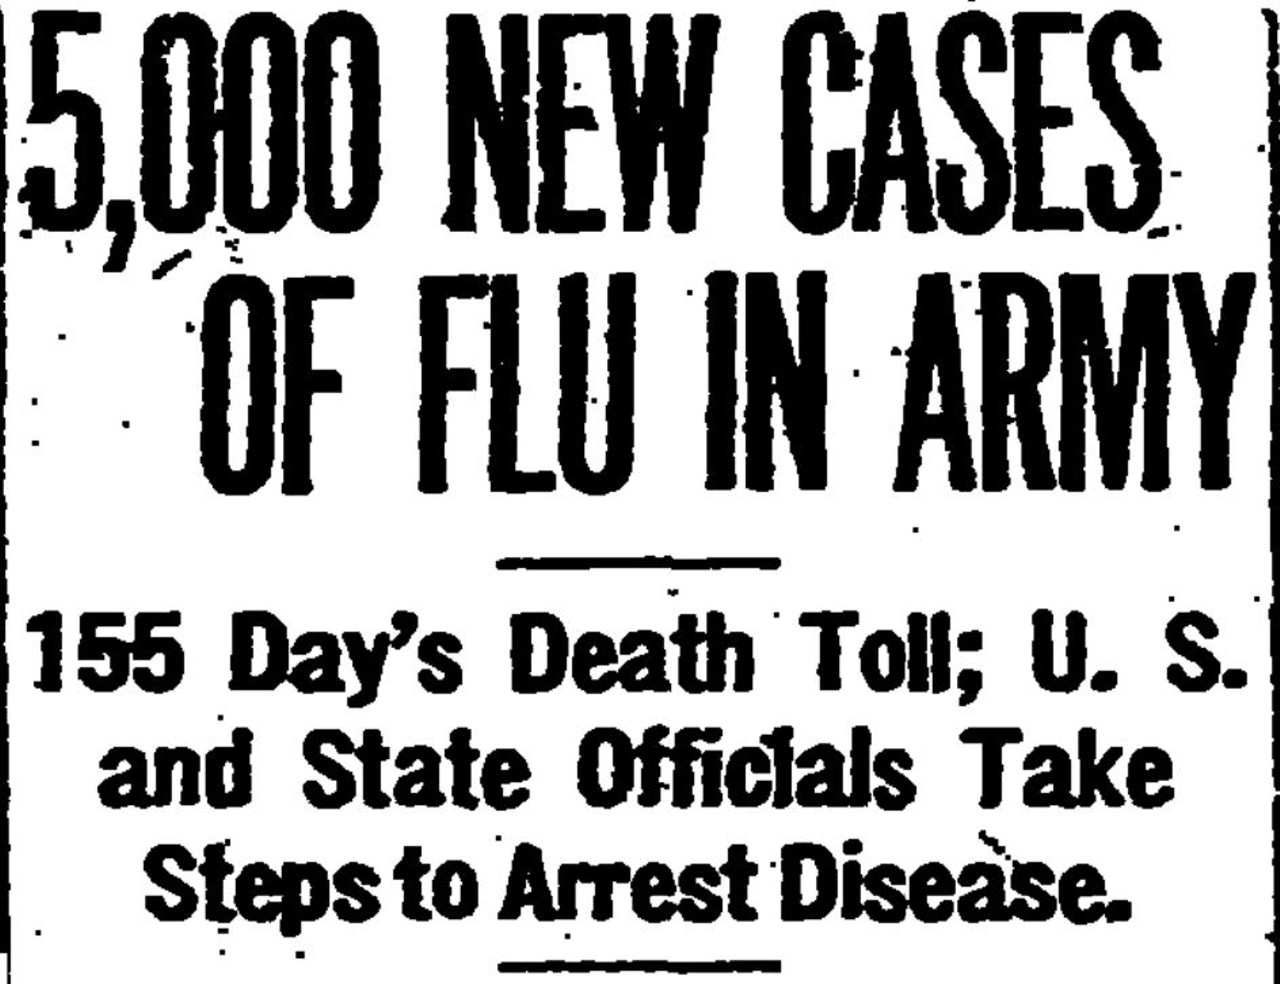 September 26th: 5,000 New Cases of Flu in Army; 155 Day&#146;s Death Toll, U.S. and State Officials Take Steps to Arrest Disease